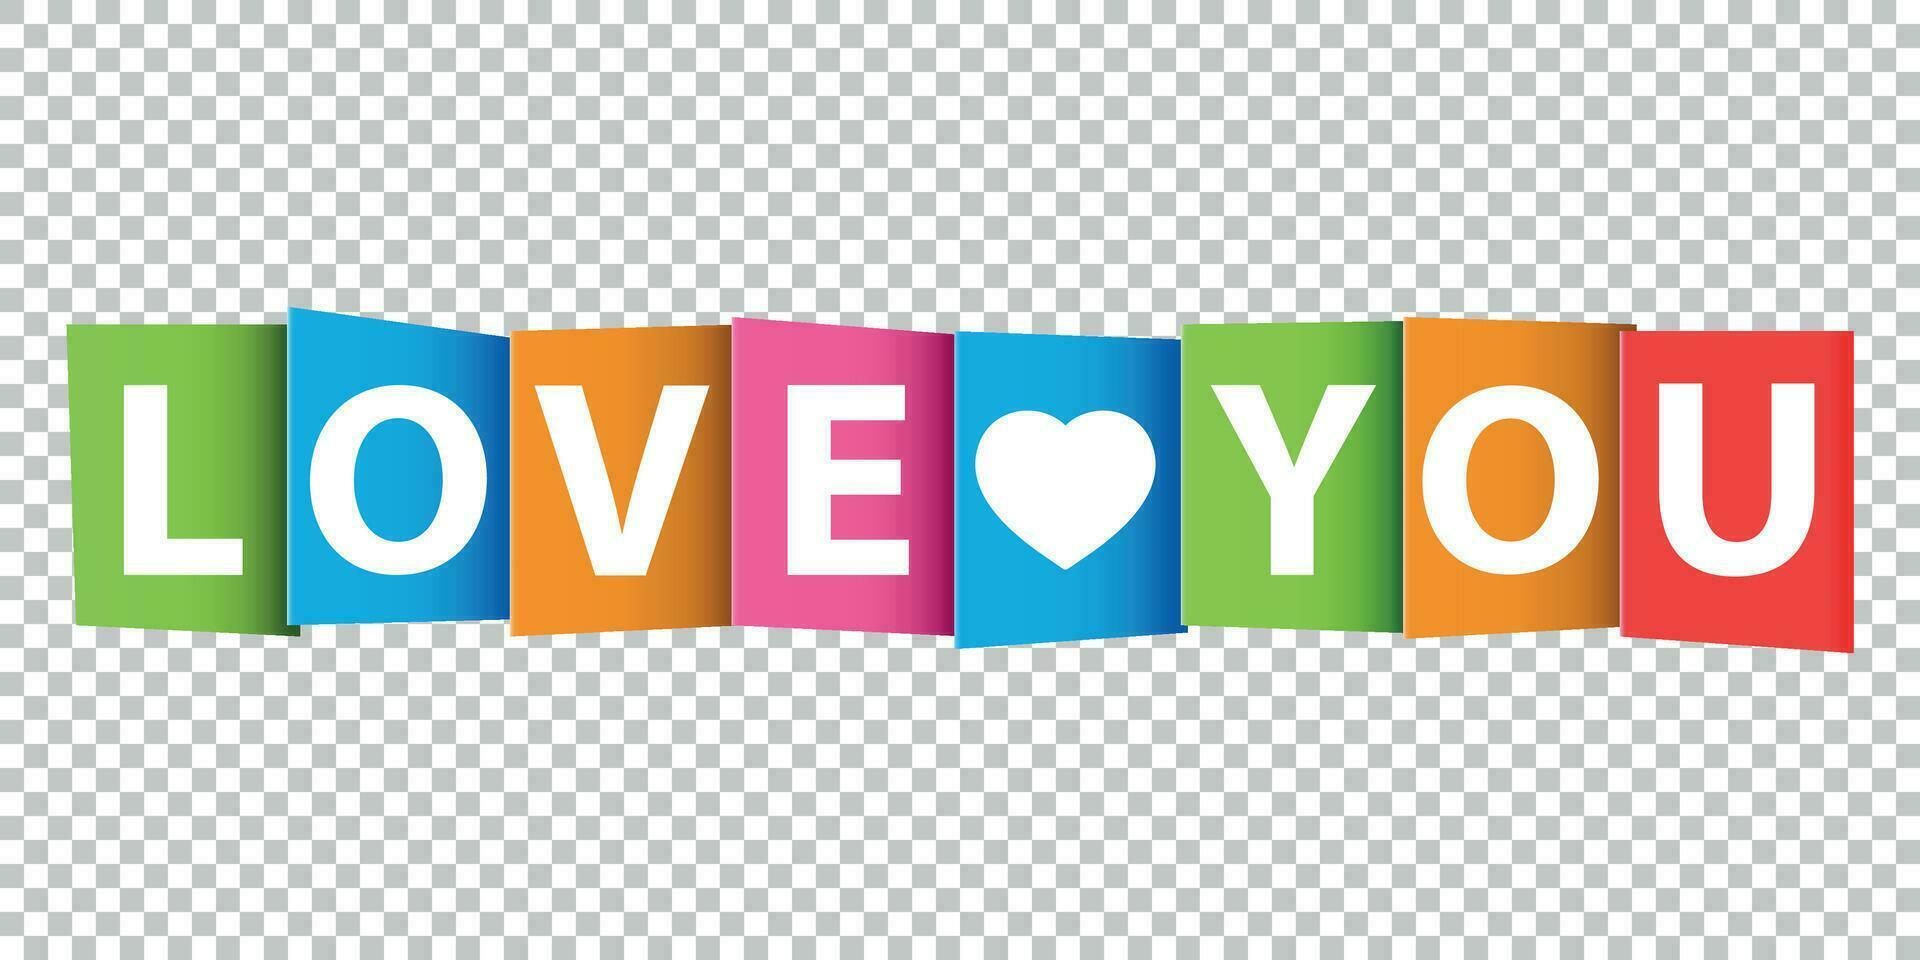 Love you colorful card. Vector illustration